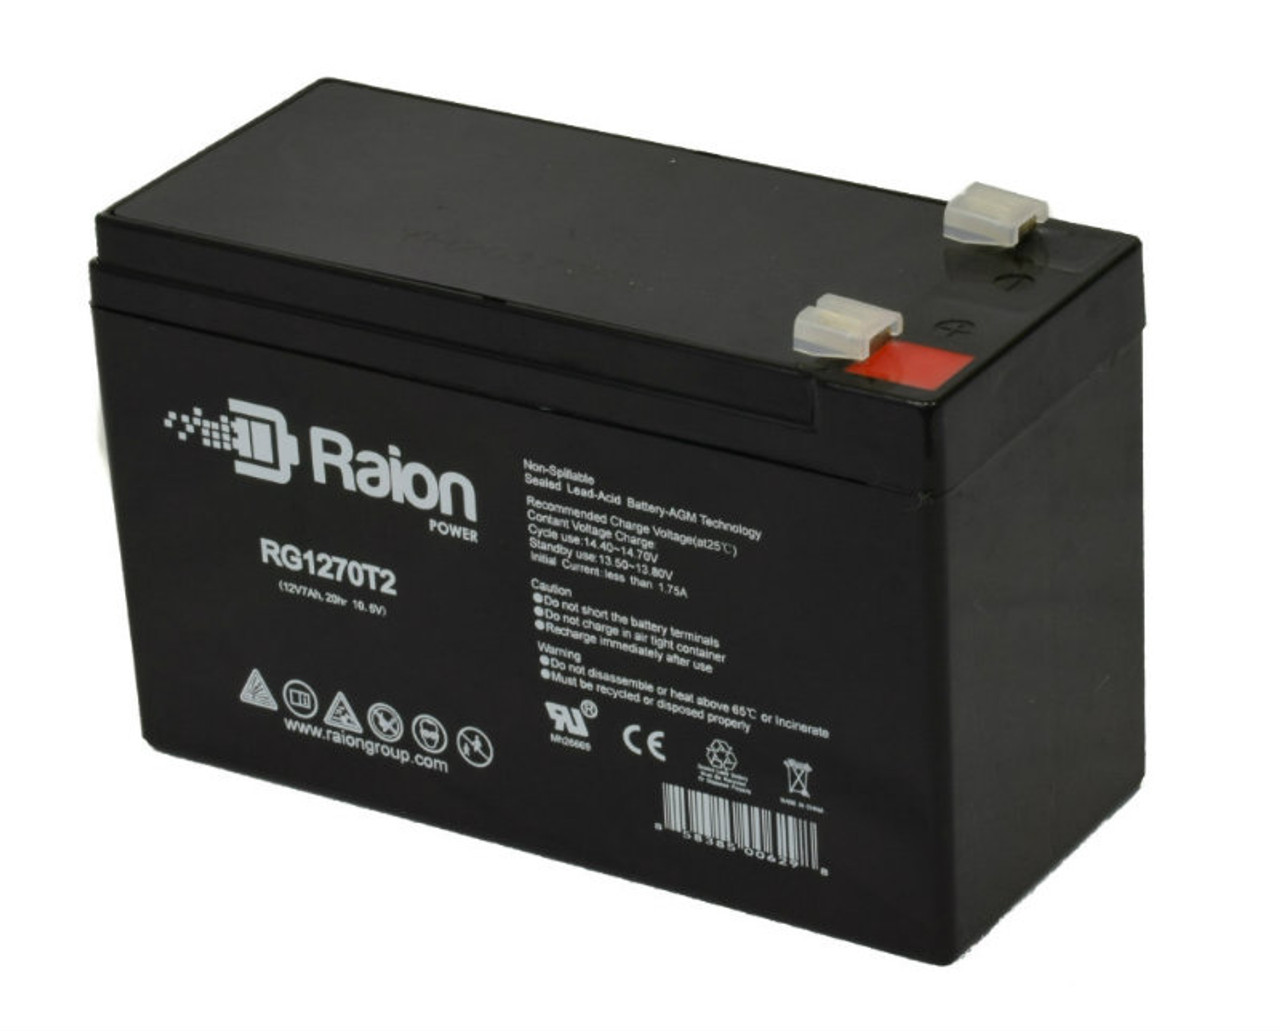 Raion Power Replacement 12V 7Ah Battery for Raion Power RG1270T1 - 1 Pack